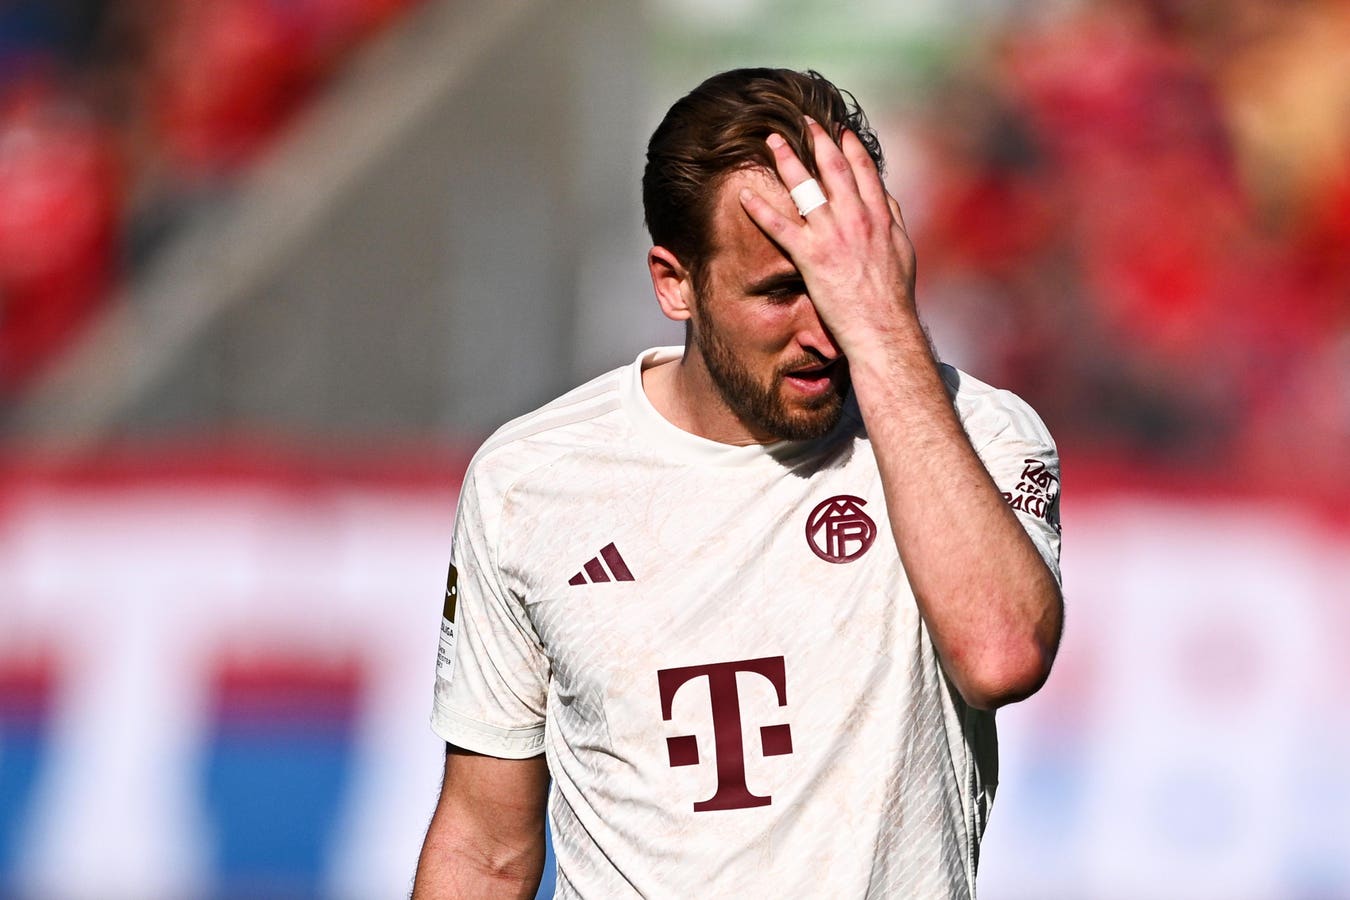 Bayern Munich With One more Defeat Ahead Of A truly noteworthy Arsenal Fixture